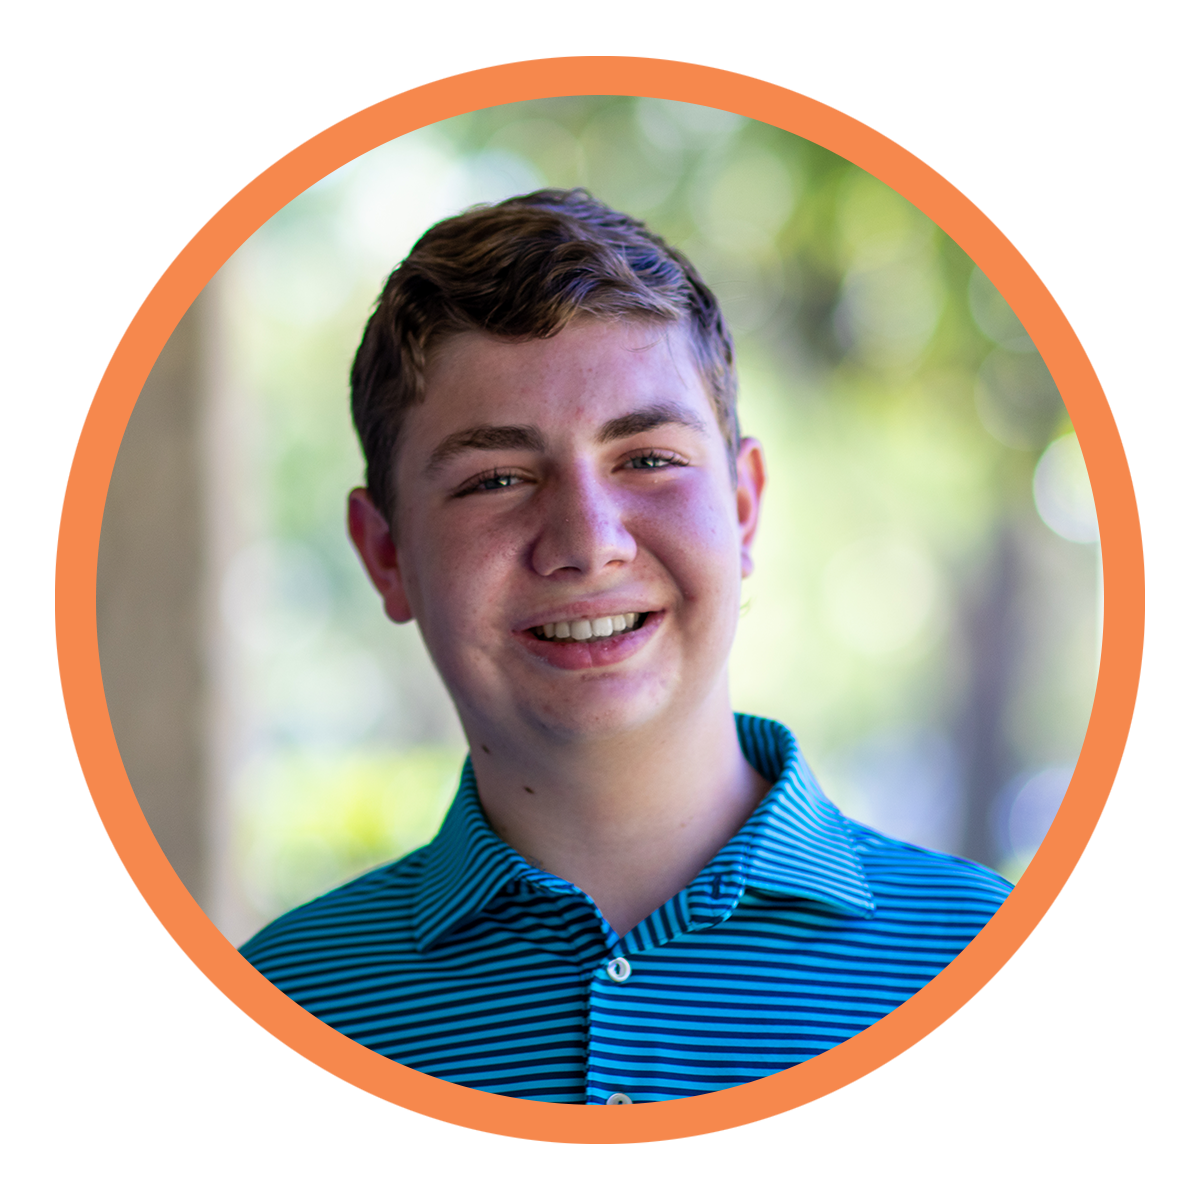  Jack is currently a Junior at Parish Episcopal School. He lives in Preston Hollow with his parents and younger sister, where you can likely find him taking pictures of flowers in his backyard or learning about all there is to know about airplanes in